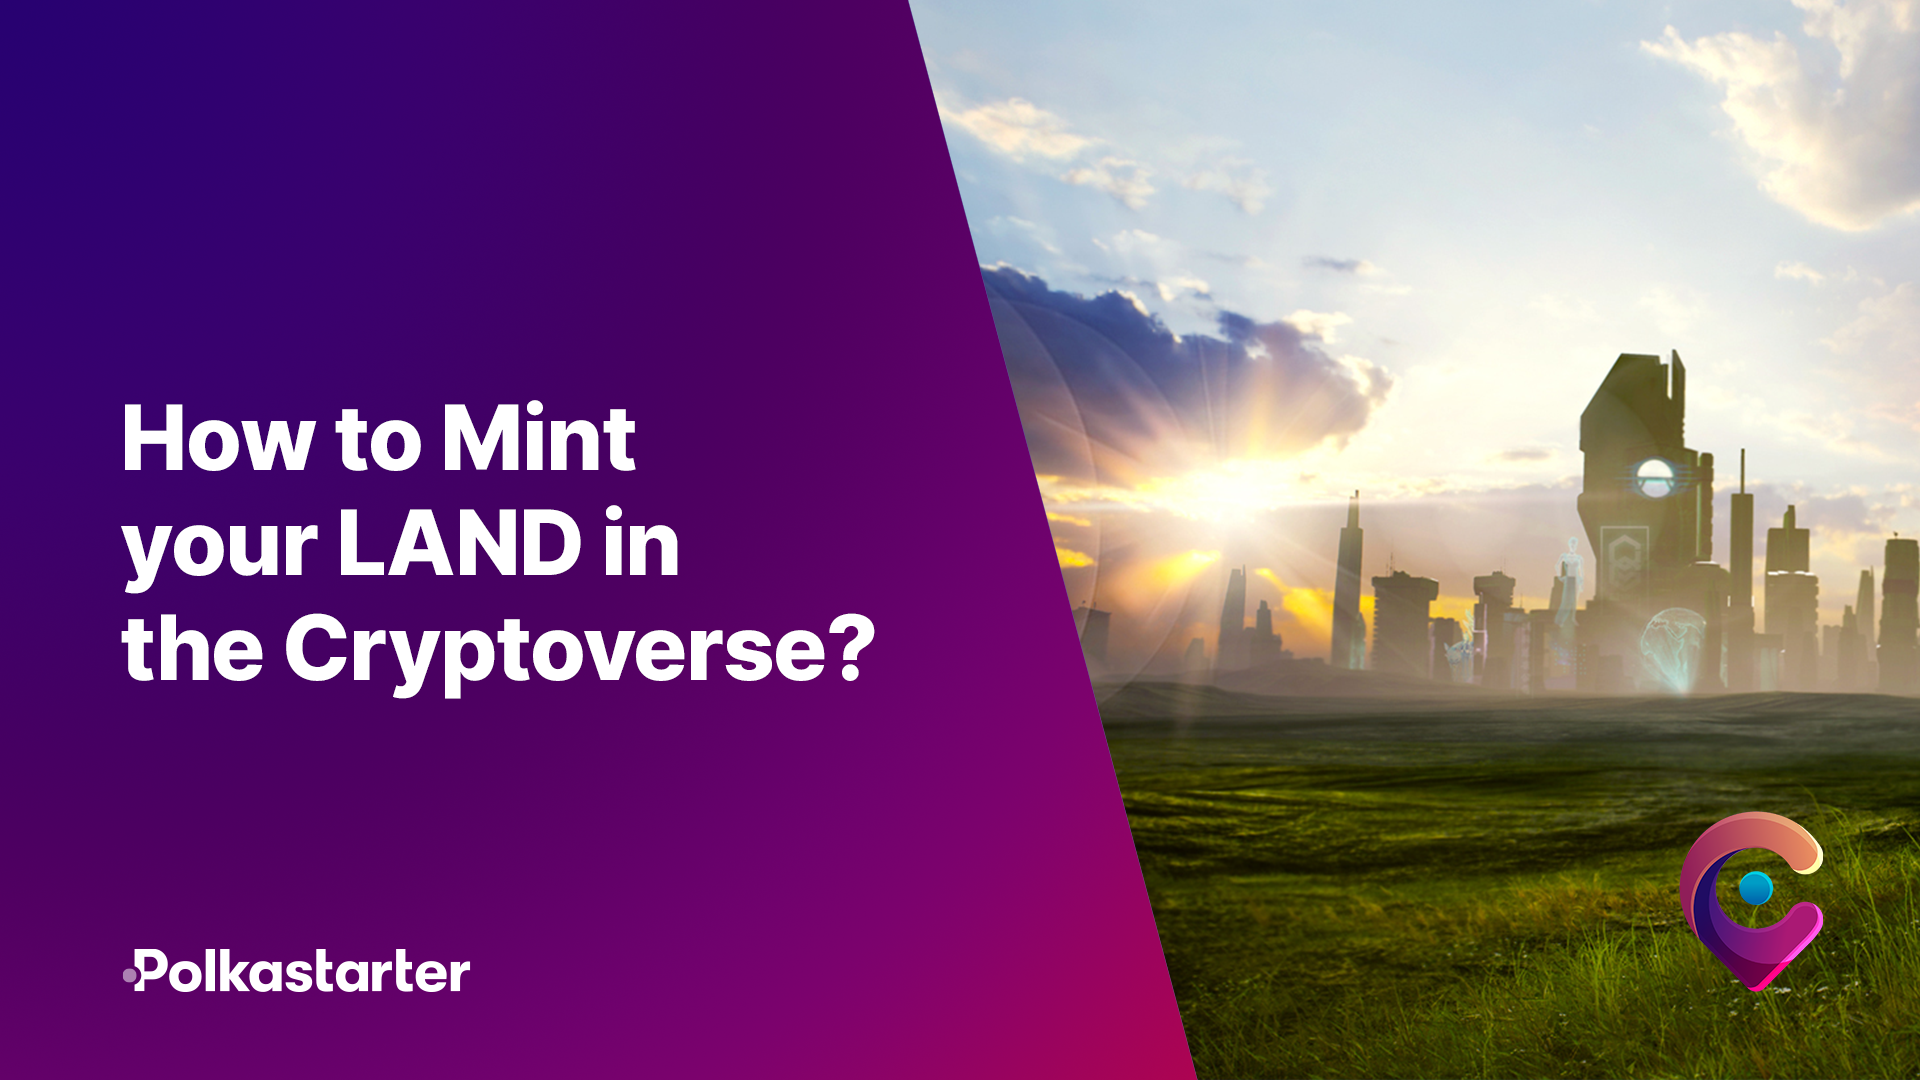 How To Mint Your LAND in the Cryptoverse